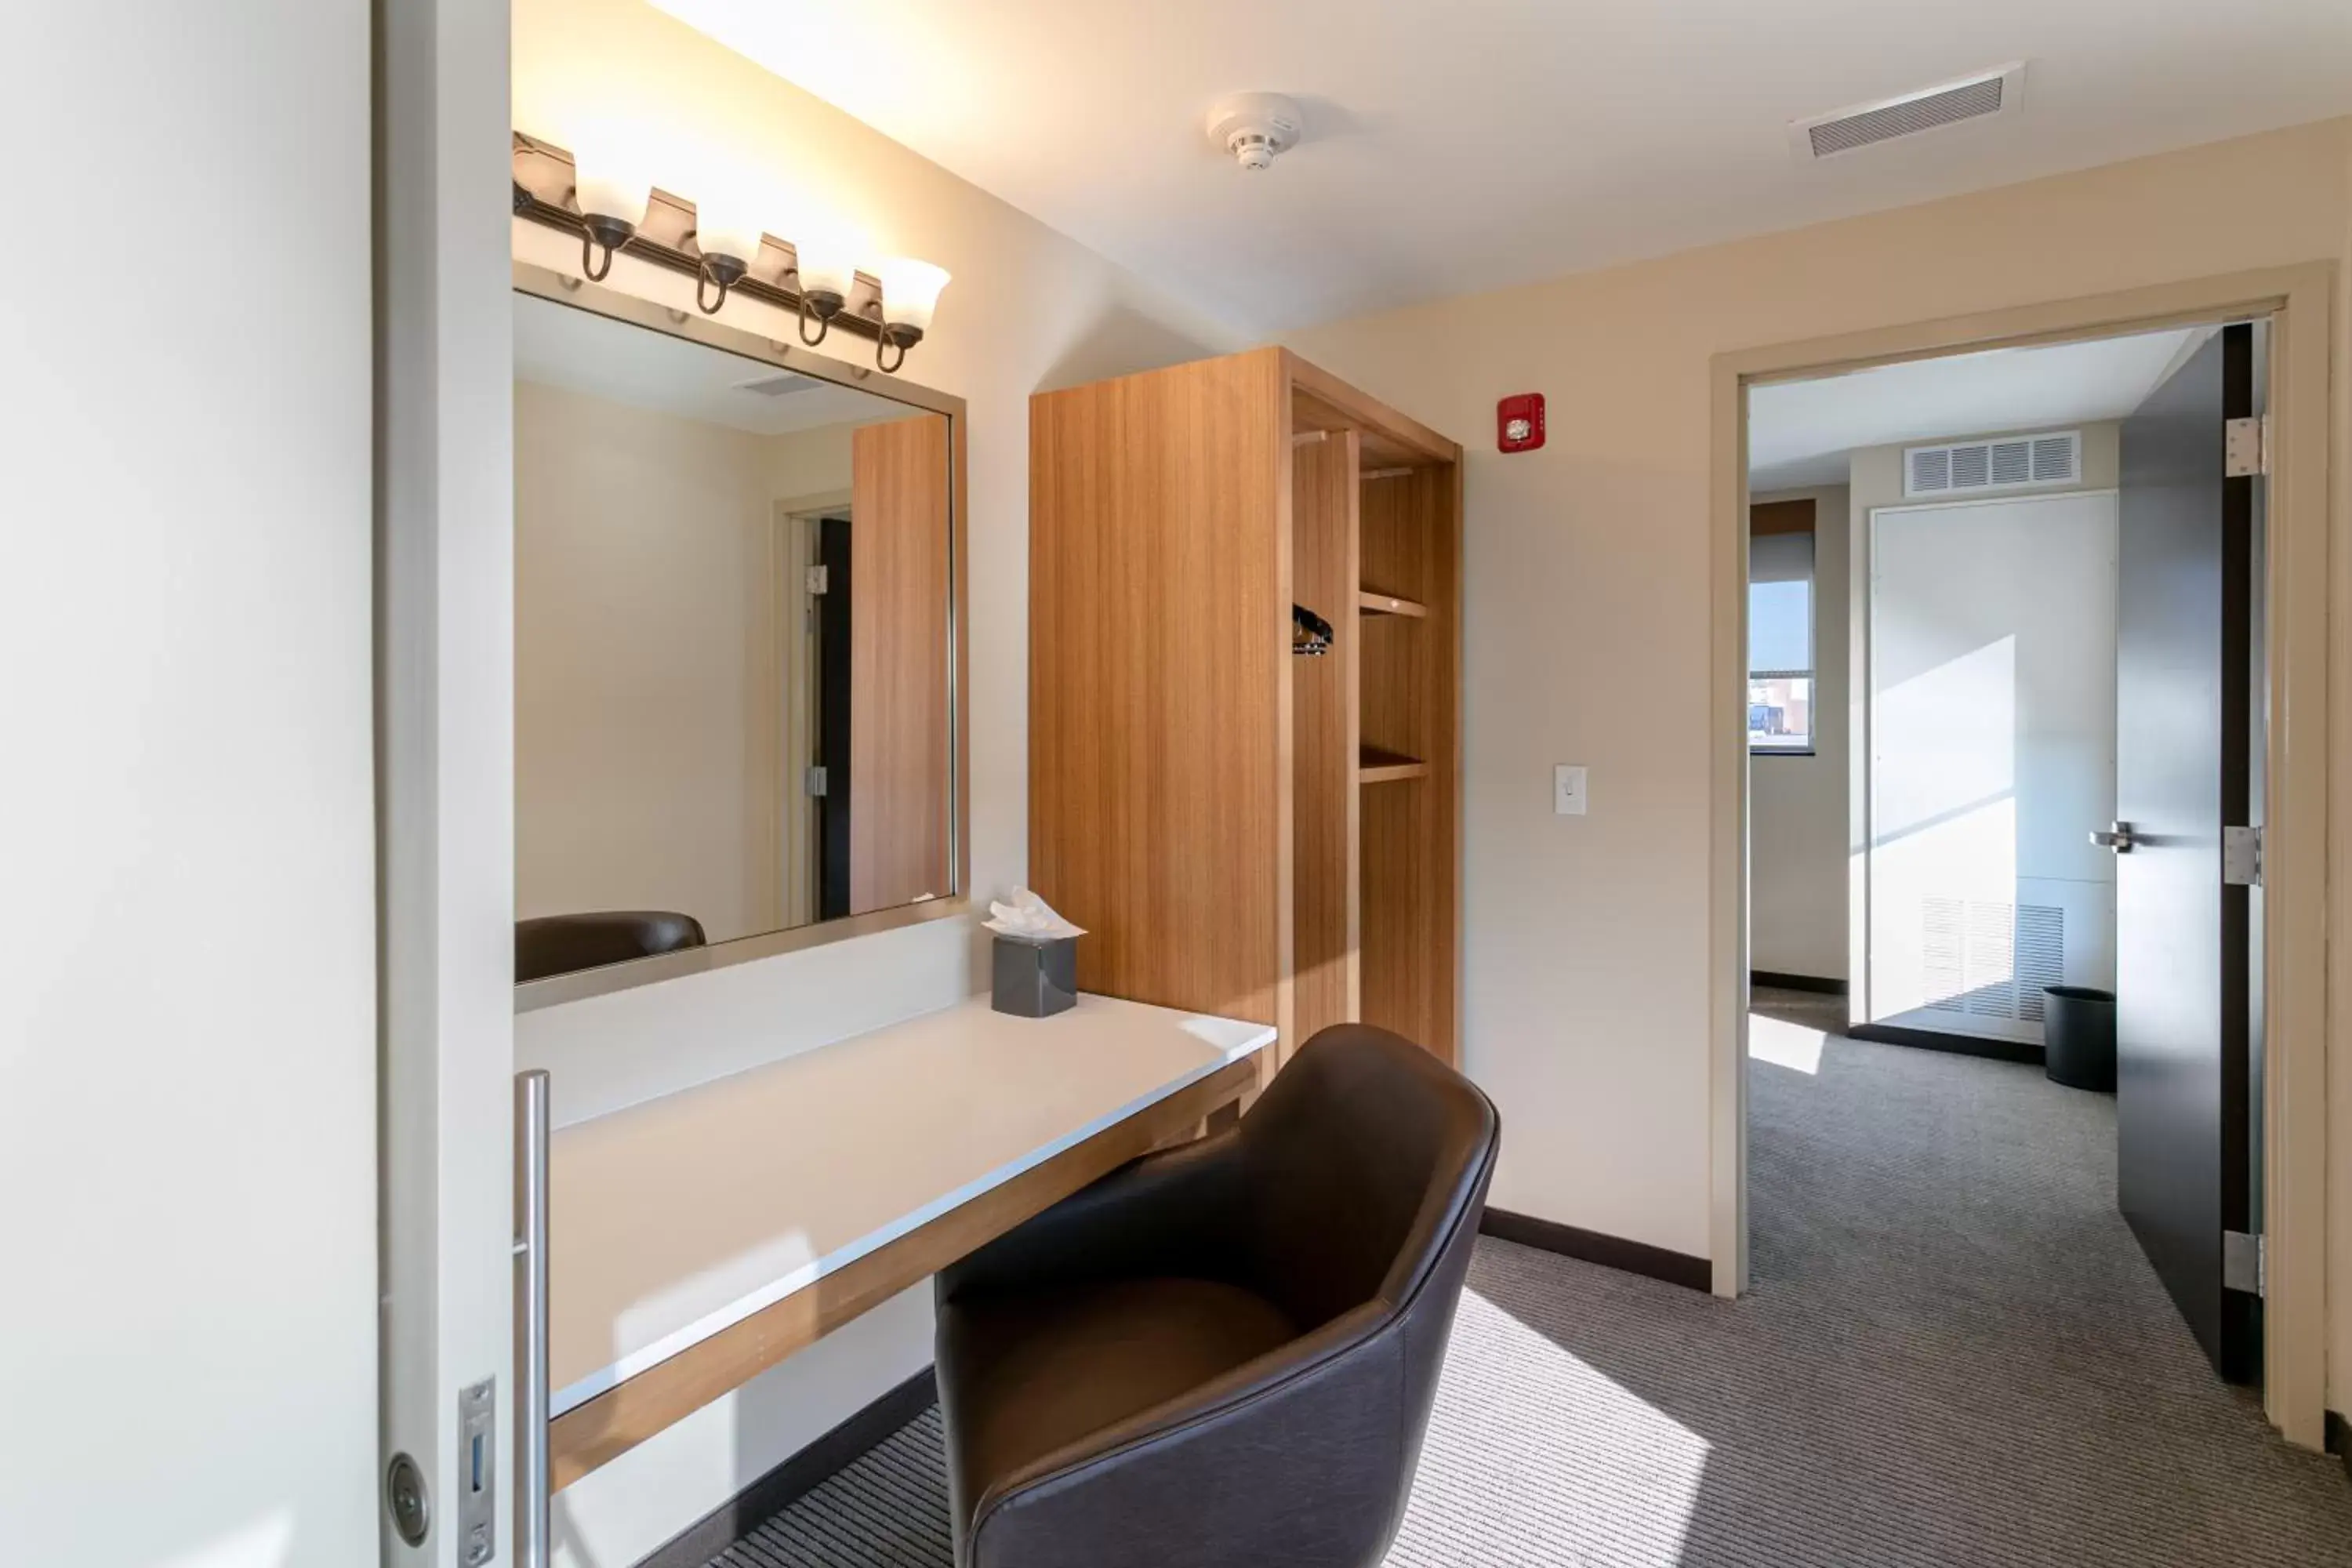 Area and facilities, Bathroom in Hyatt Place Wilmington Riverfront